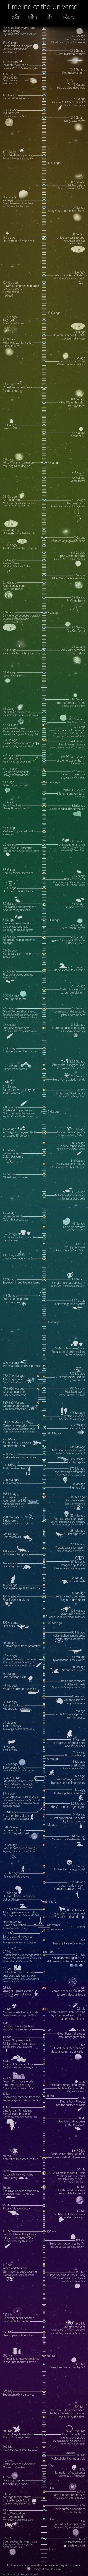 Extremely Detailed History of the Universe Infographic